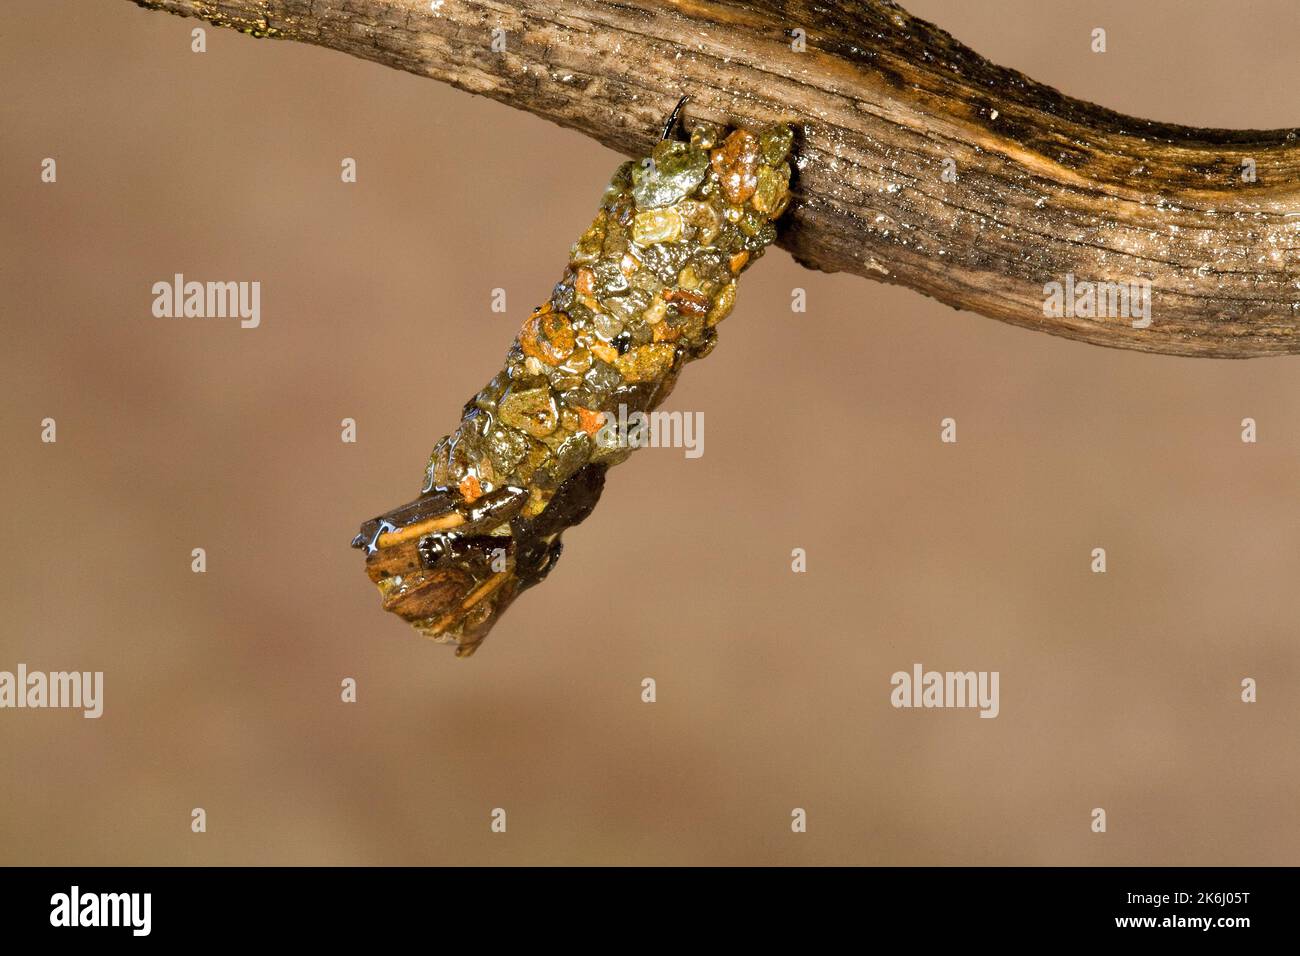 The larva of a caddis fly, encased in a hardened sheath made of tiny rocks, hanging from a branch at water's edge just before hatching into an adult. Stock Photo